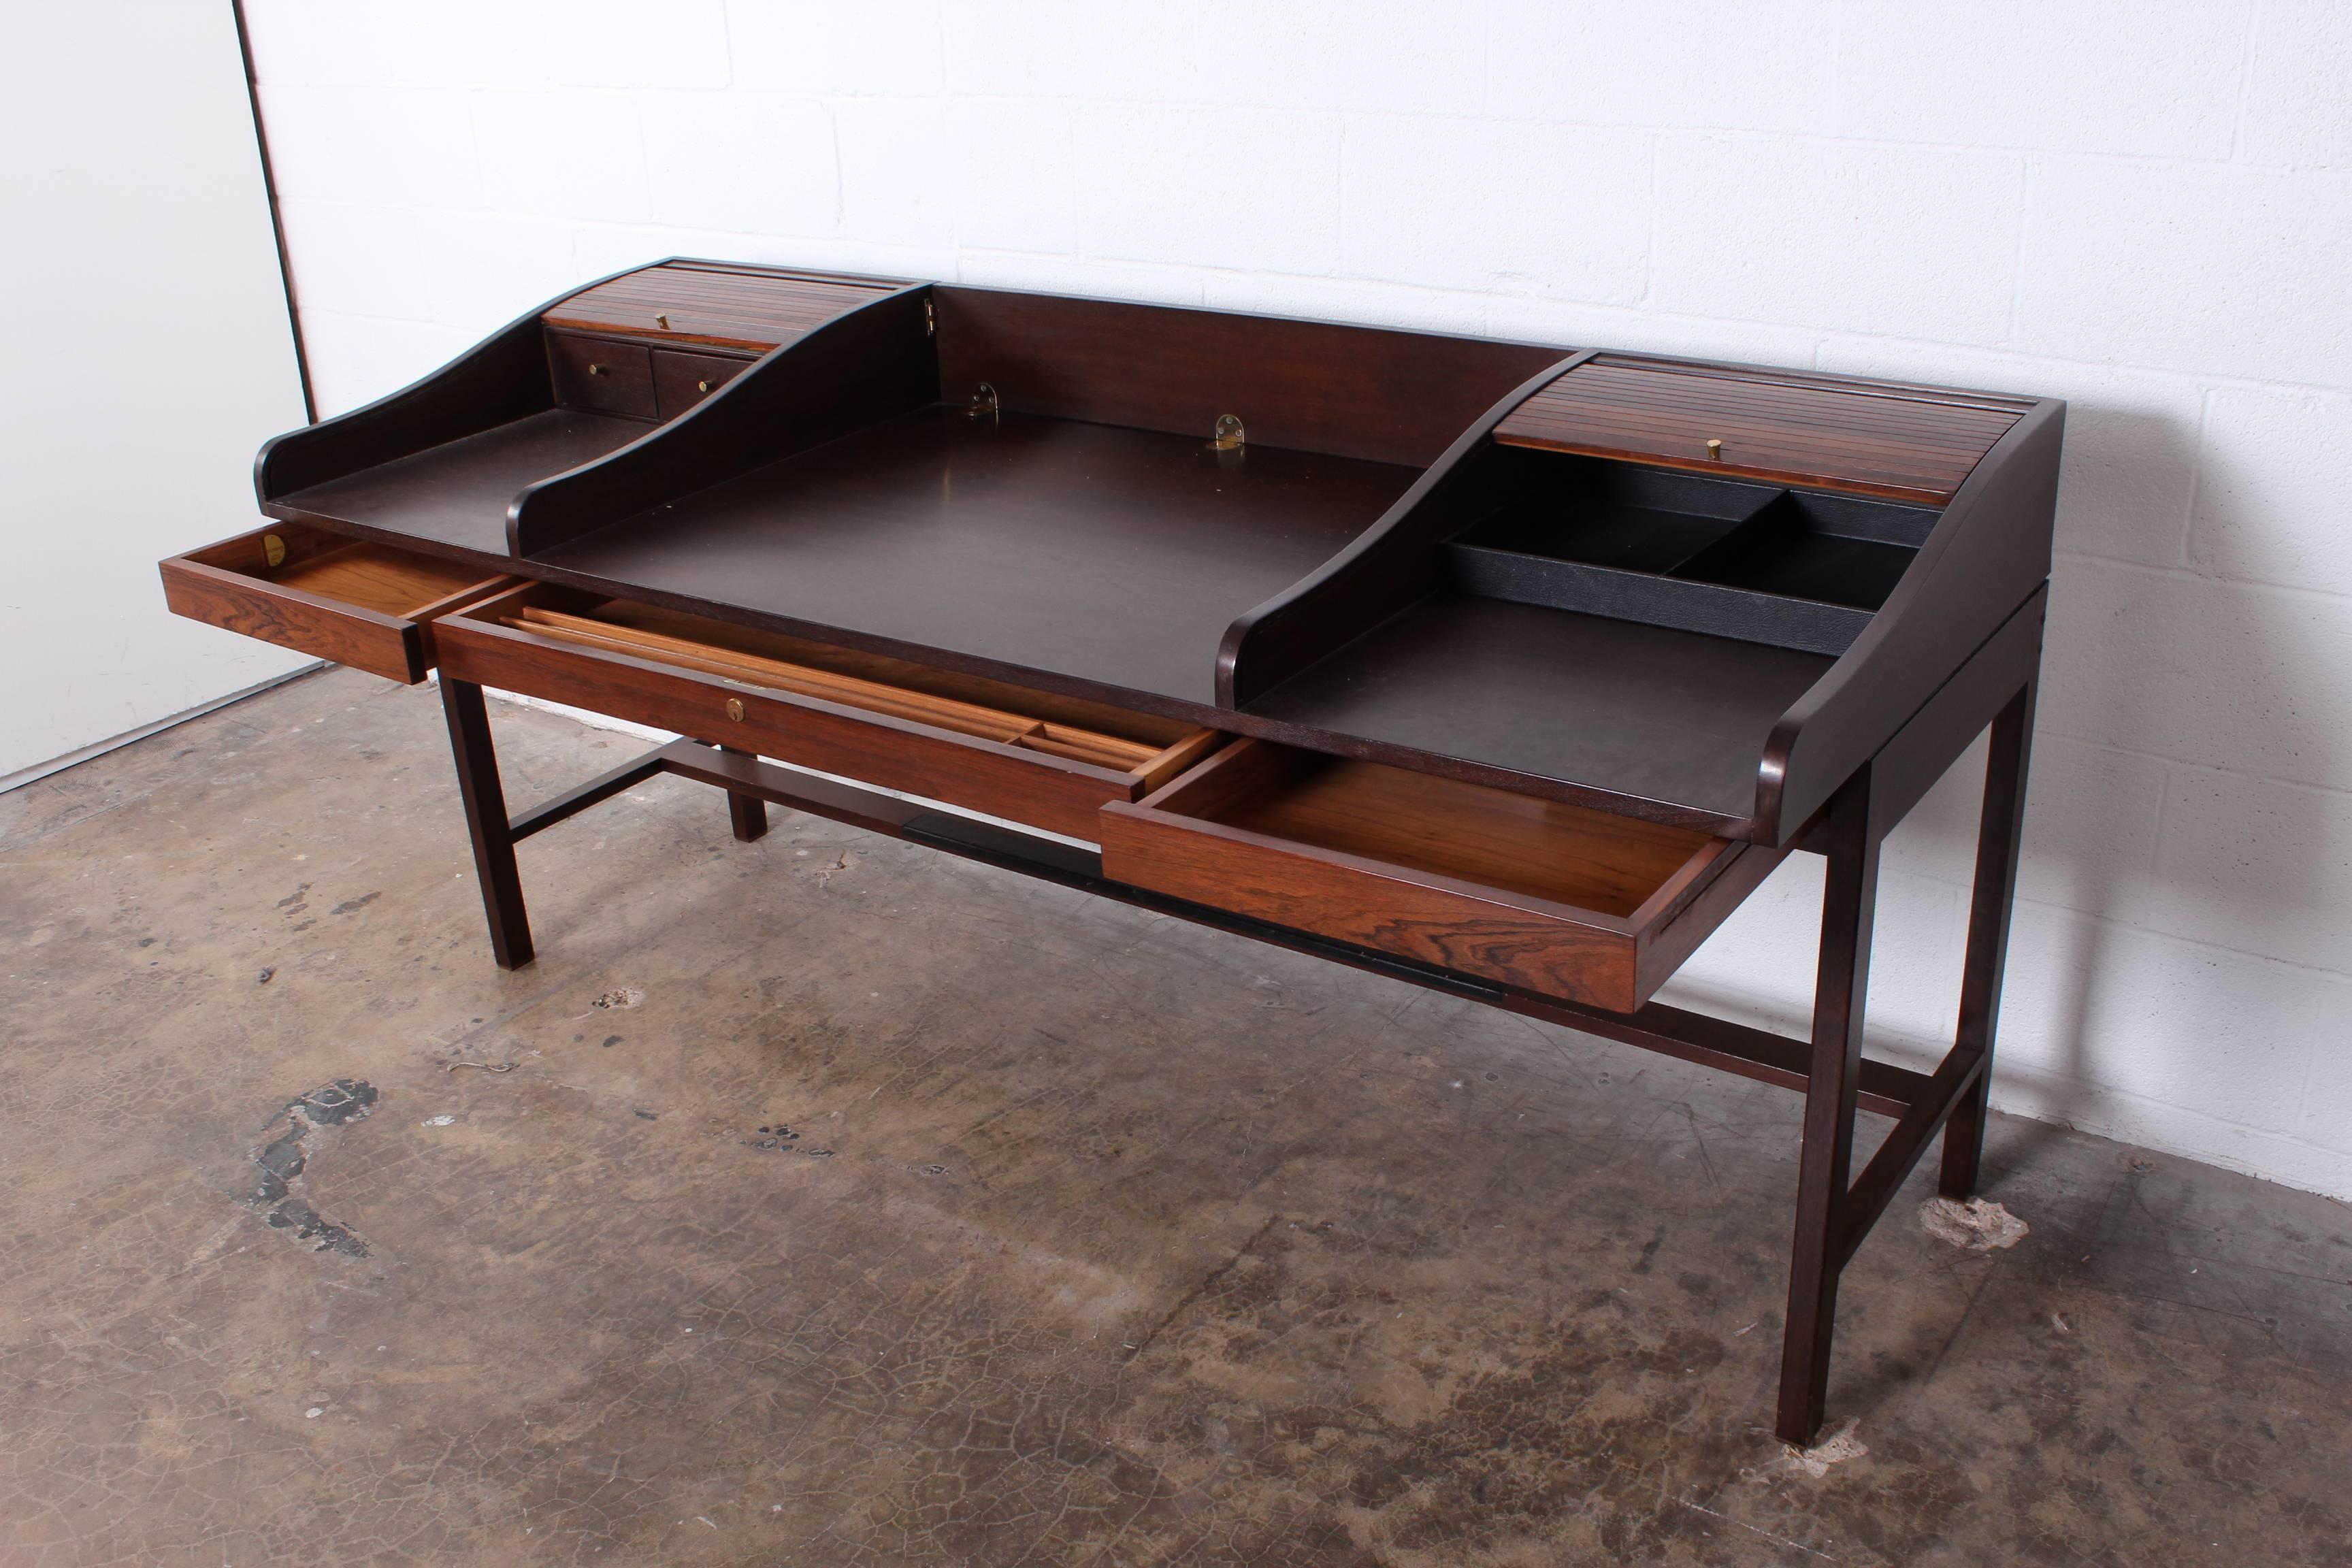 A rosewood tambour roll top desk with brass feet and leather trim. Designed by Edward Wormley for Dunbar.